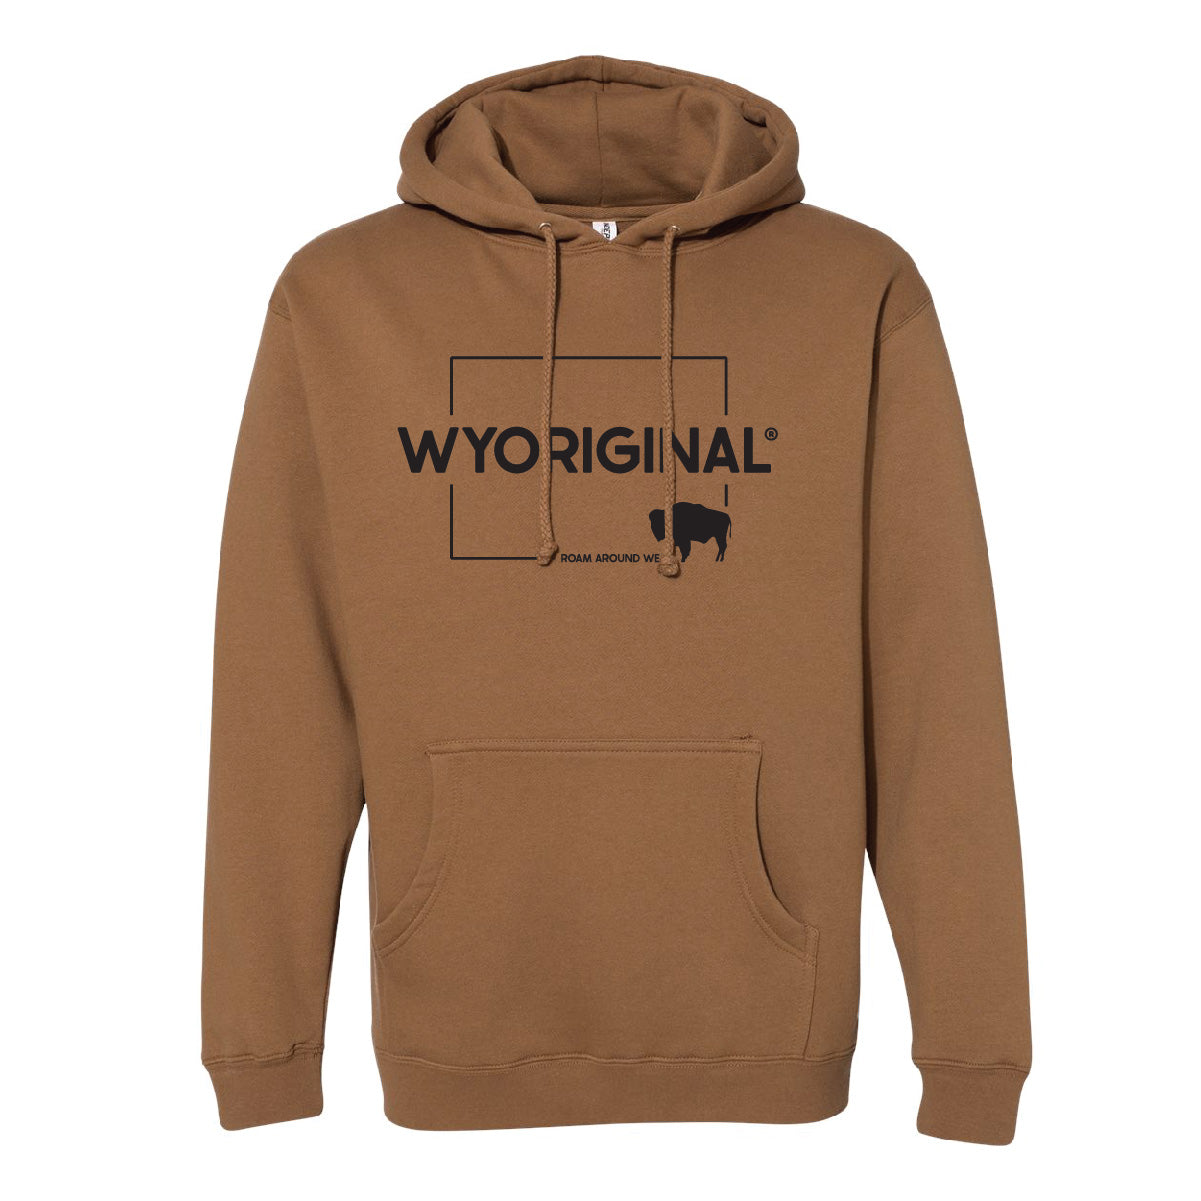 Roam Around Wear is a Wyoming t-shirt company based in Gillette, Wyoming